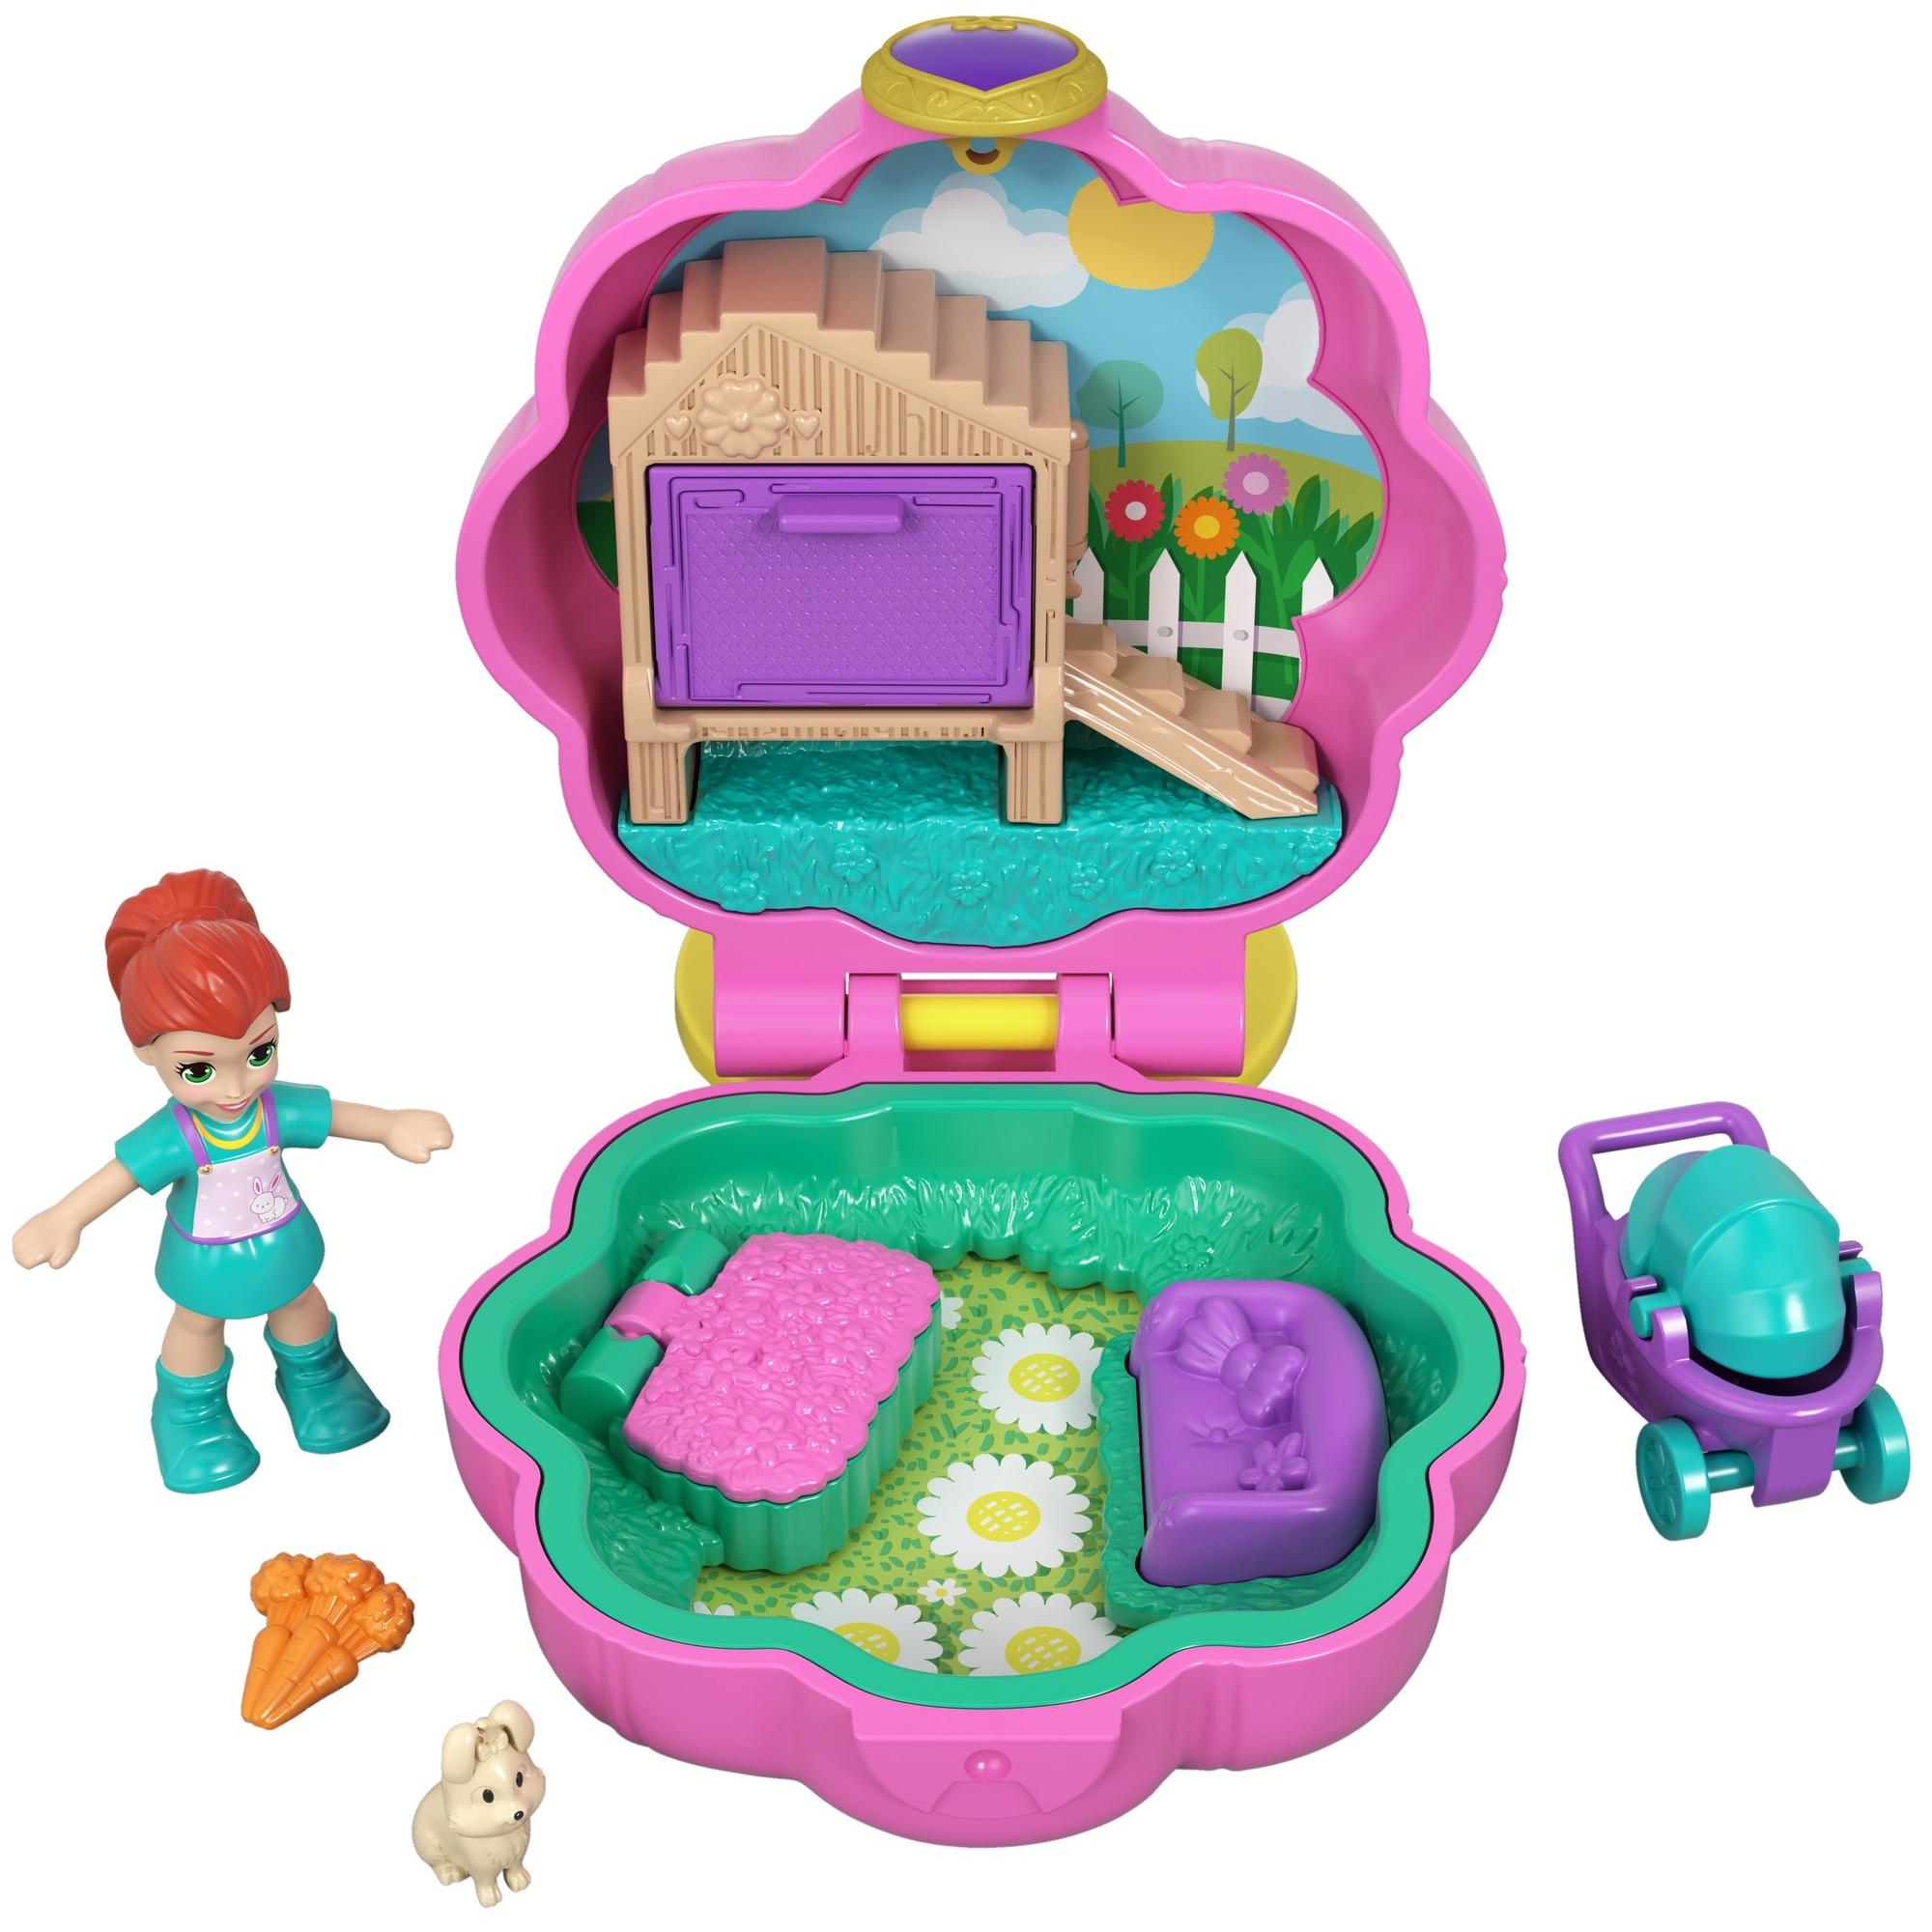 Polly Pocket Tiny Pocket Places Lila Pet Compact with Doll - image 1 of 7